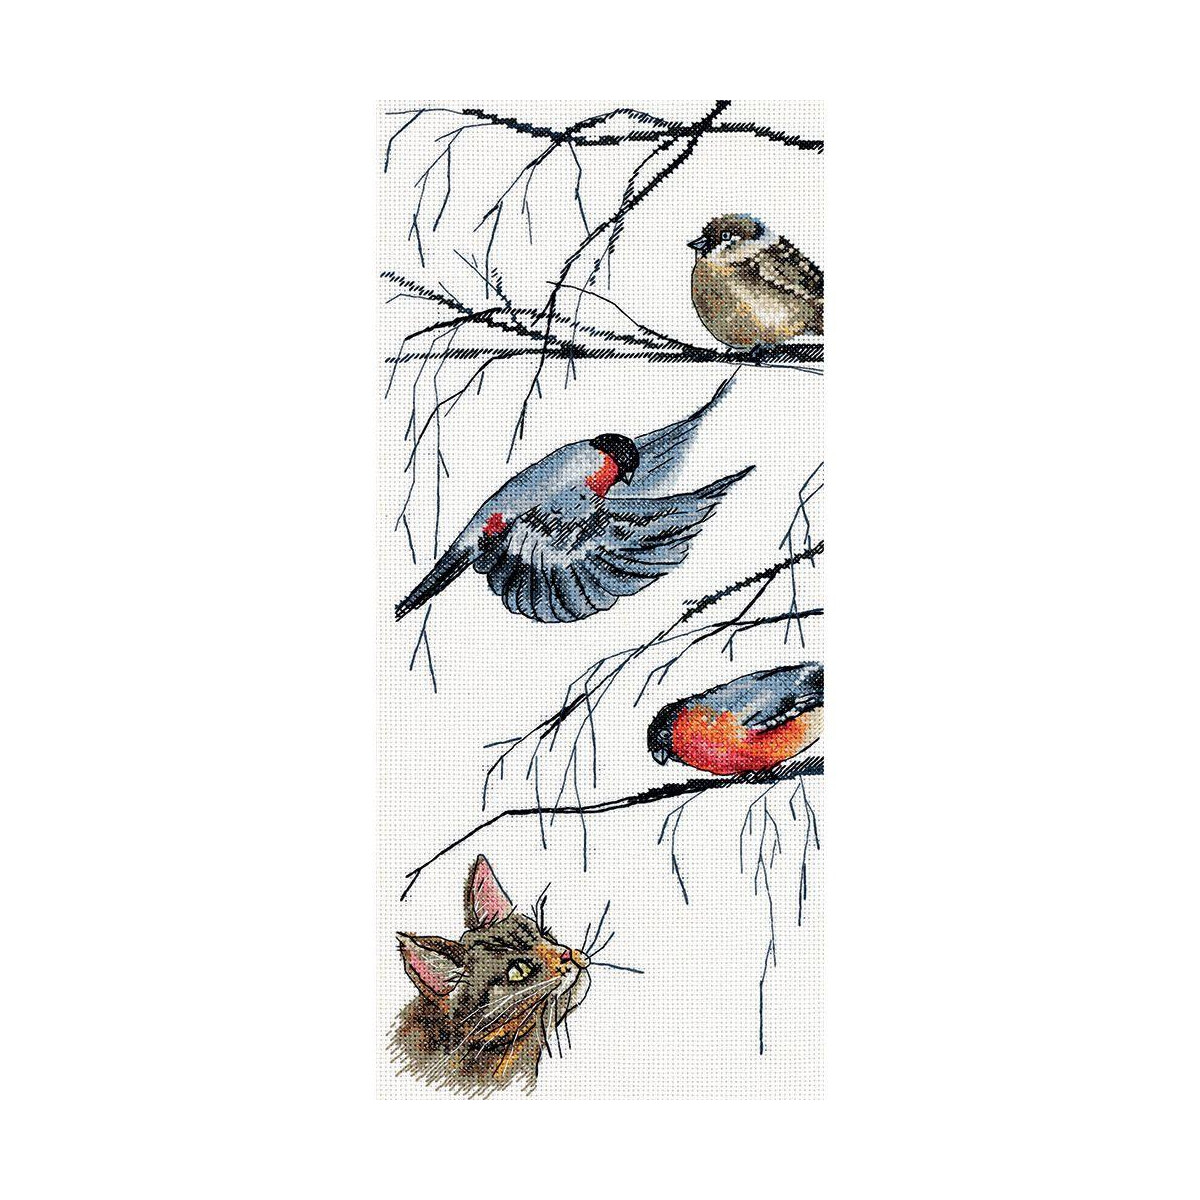 Panna counted cross stitch kit "Birds and a Curious...